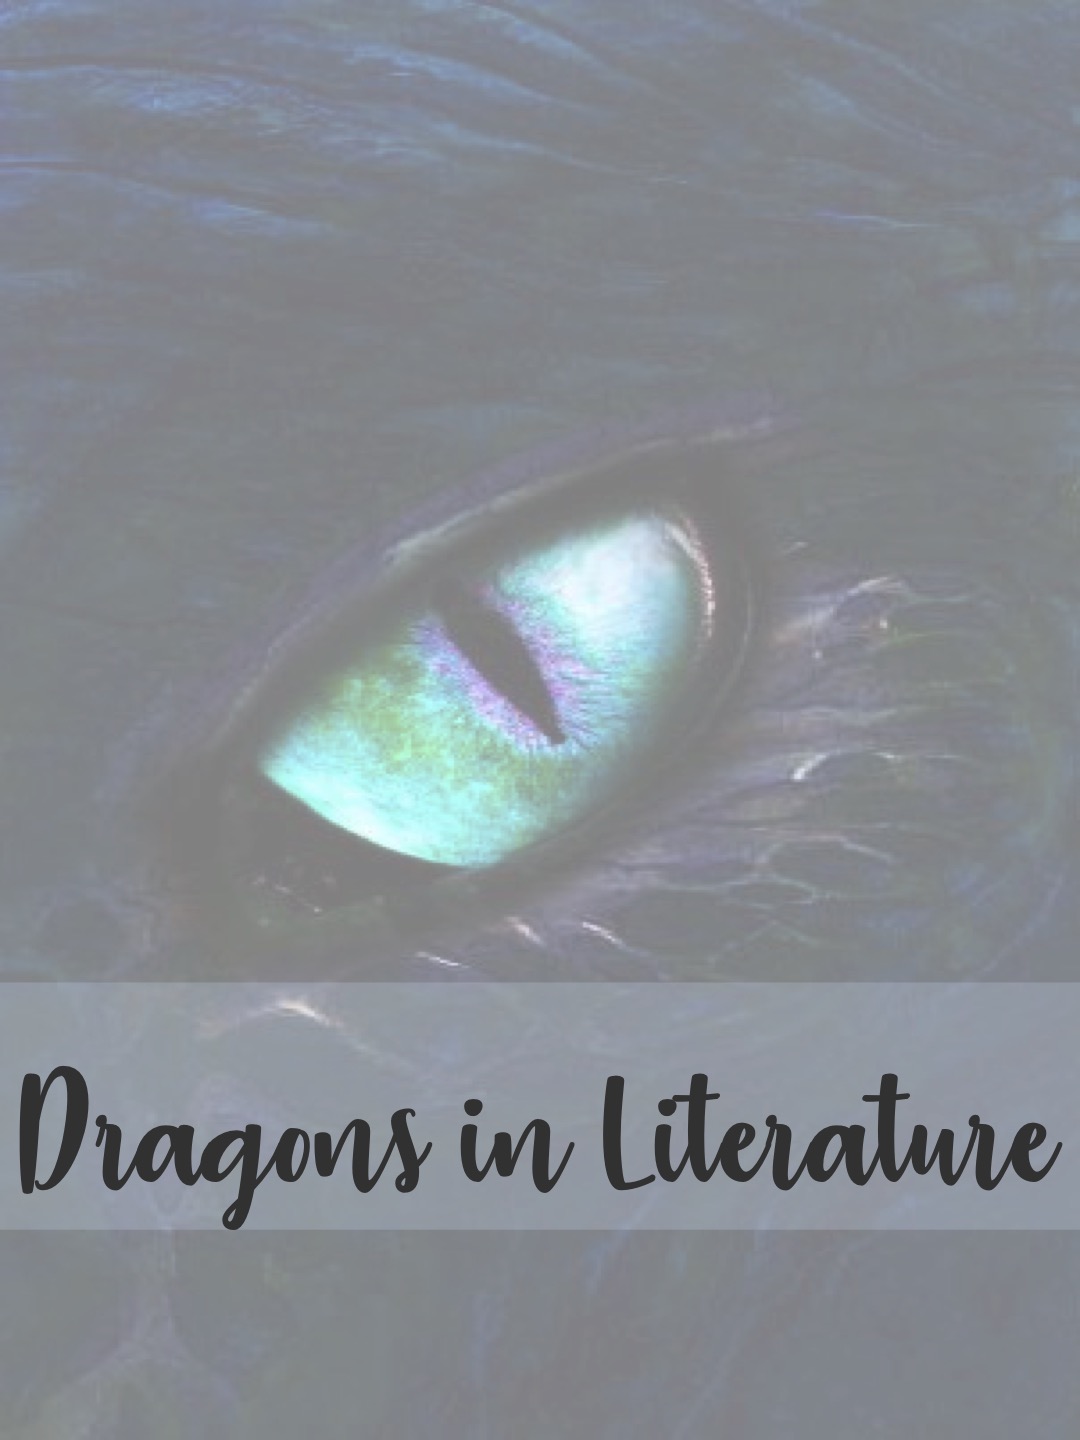 Theme Thursday: dragons in literature